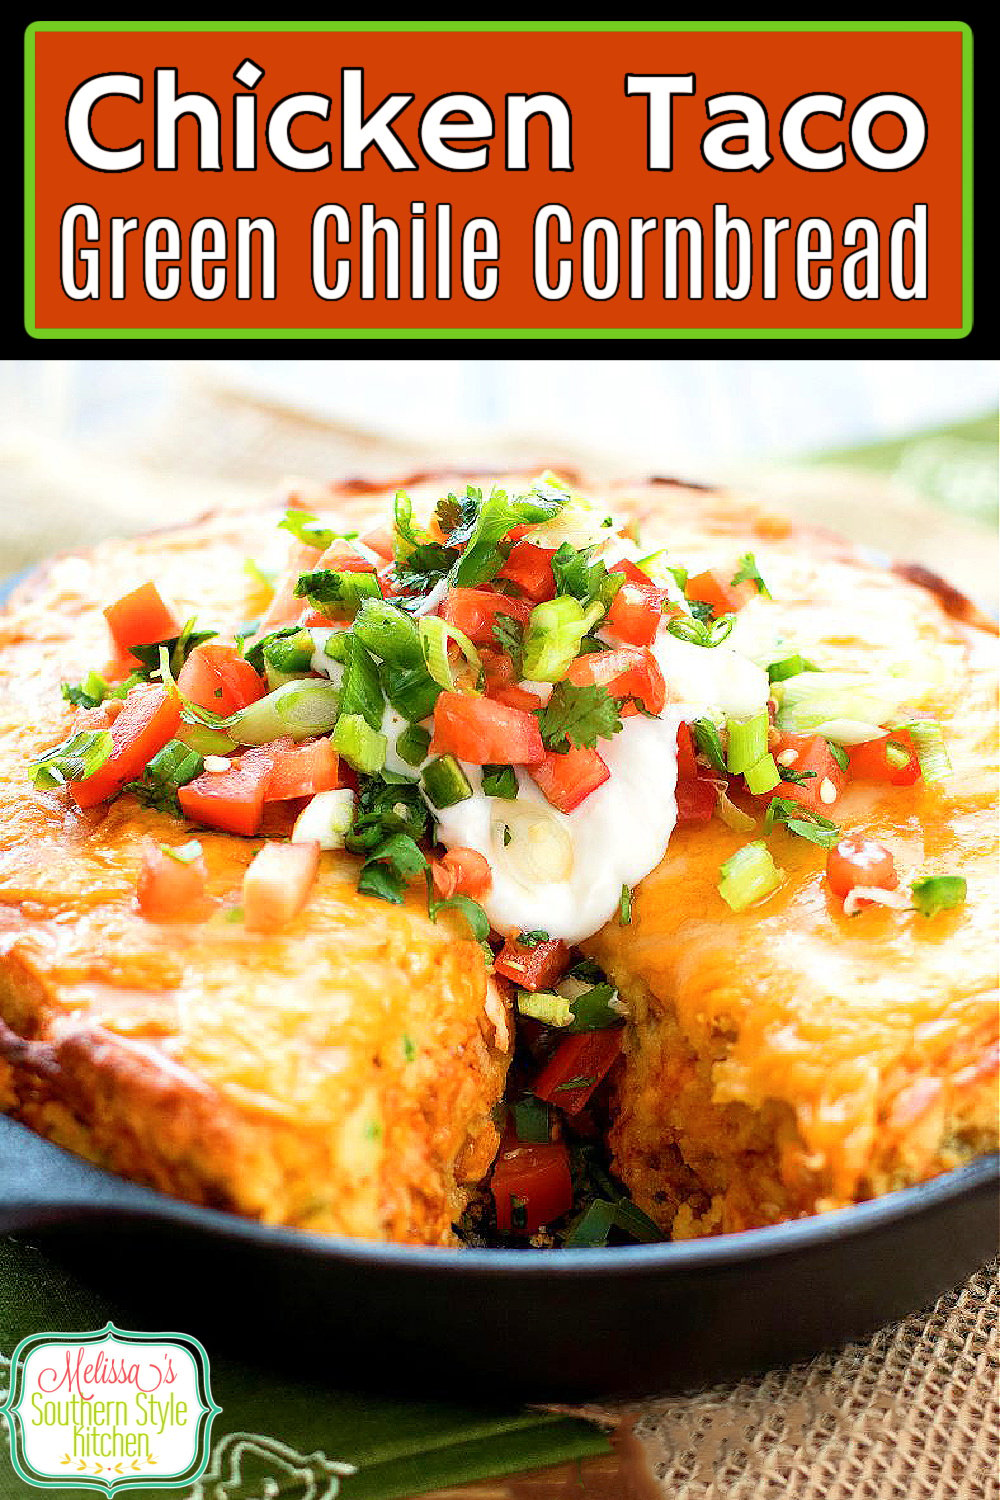 Top this Chicken Taco Green Chile Cornbread with your favorite fixins' and it's a complete meal #chickentacos #cornbreadrecipes #chickentacocornbread #tacos #southerncornbread #dinnerideas #food #dinner #soujthernfood #southernrecipes #greenchilecornbread via @melissasssk